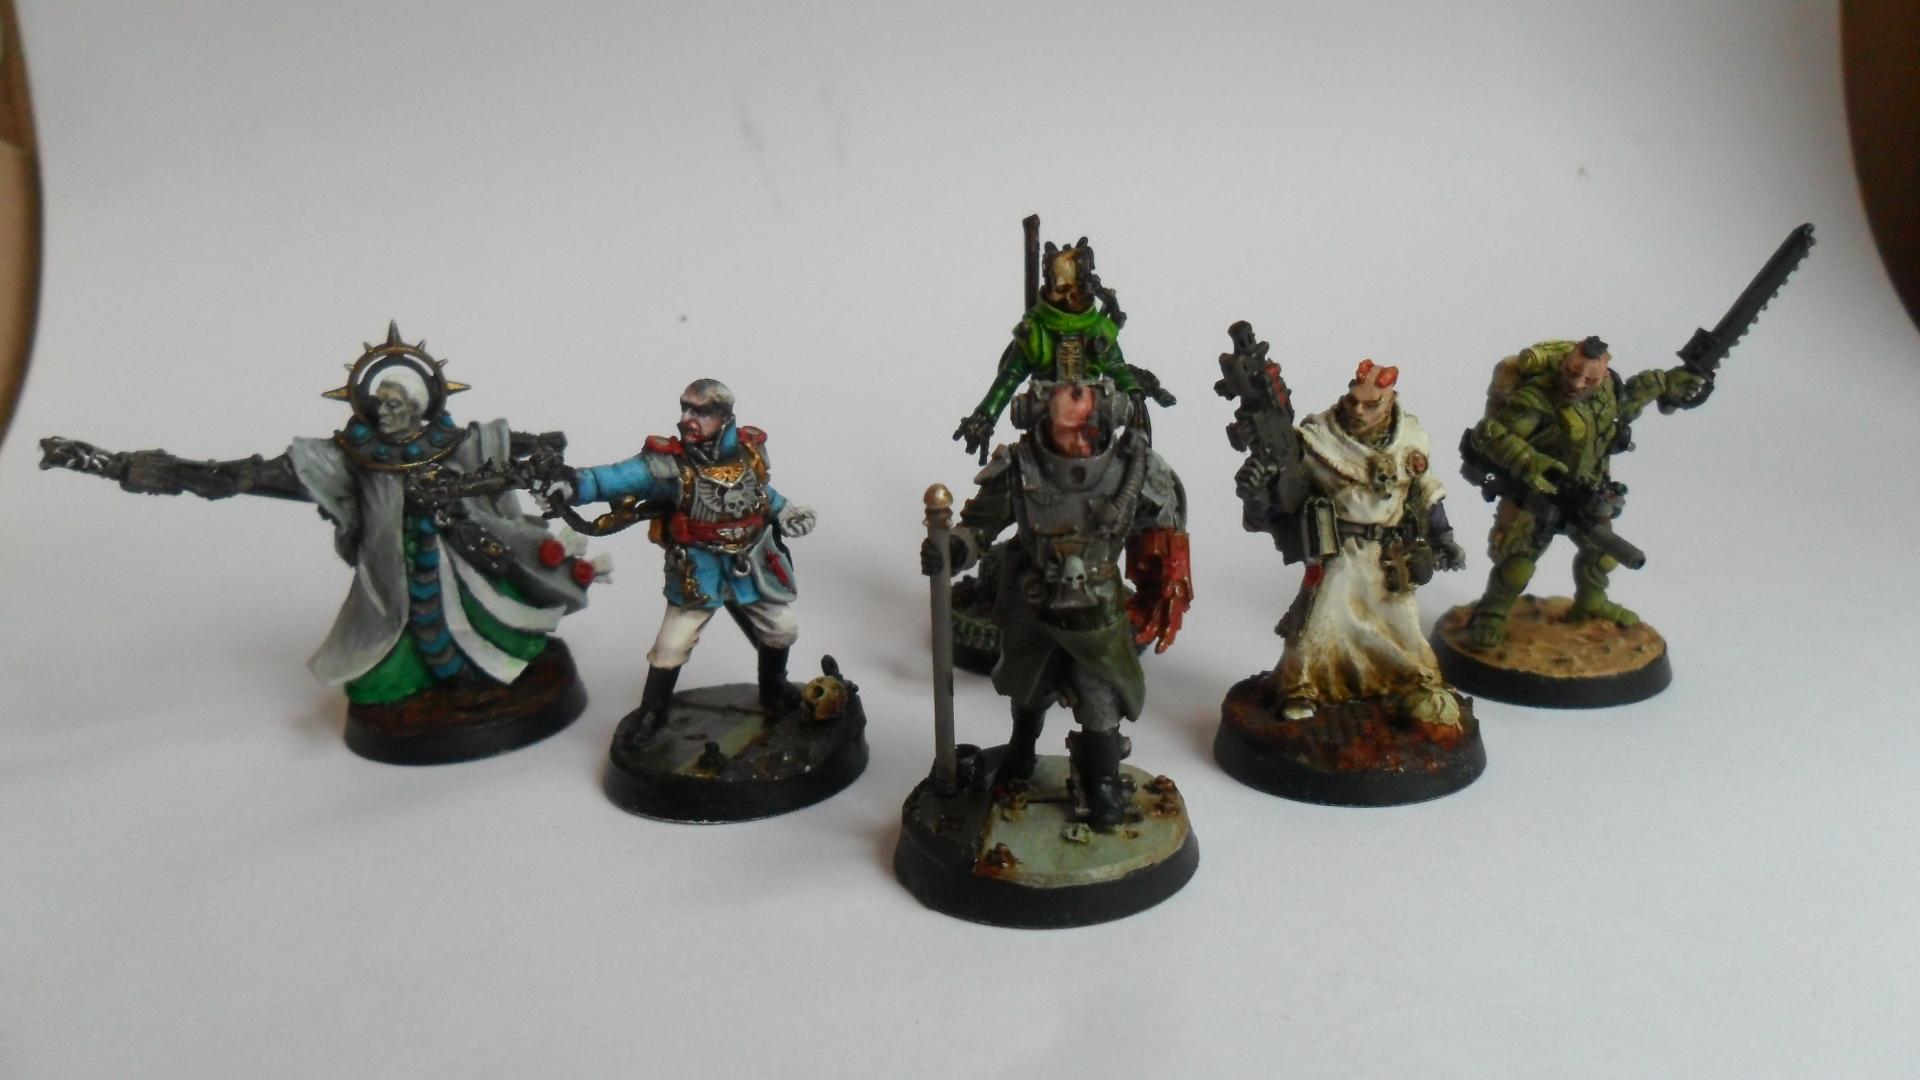 Acolytes, Astropath, Comabt Medic, Duelist, Inq28, Inqusitor, Techpriest